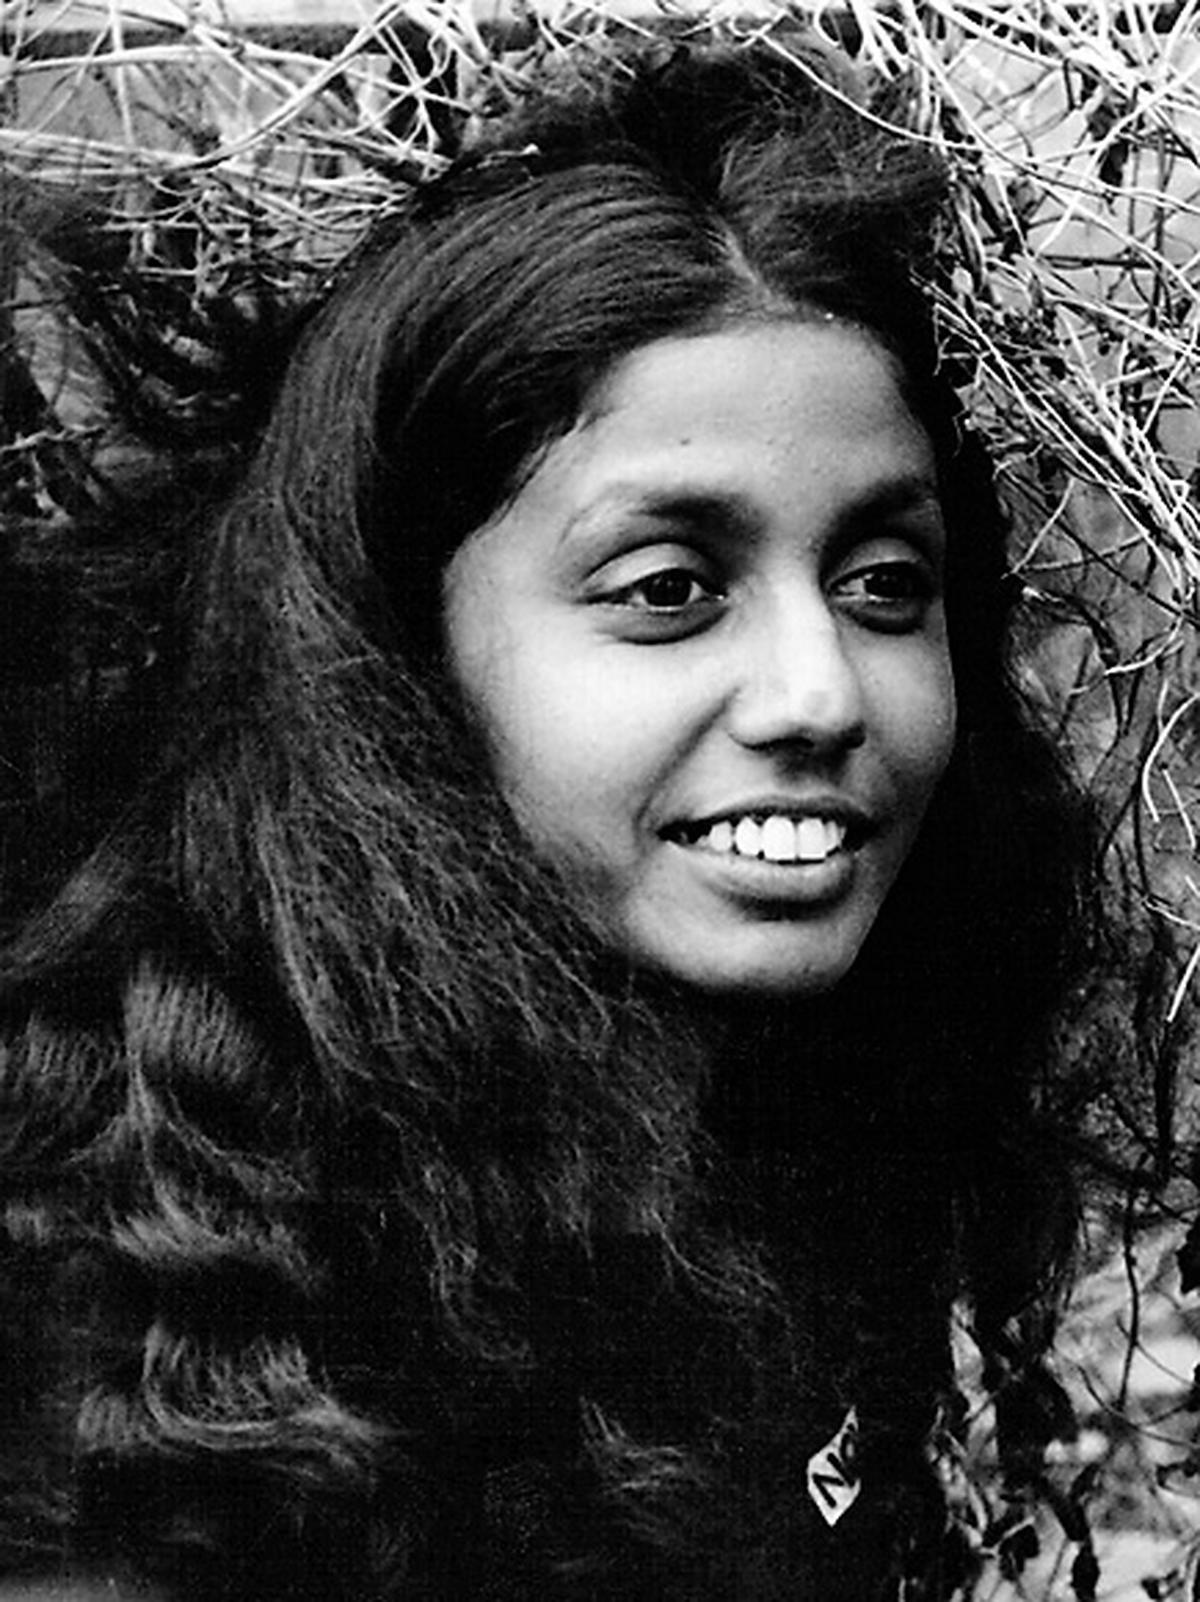 Rajani Thiranagama, Tamil human rights activist and university professor, who was assassinated allegedly by the LTTE in 1989 for speaking out against them. 